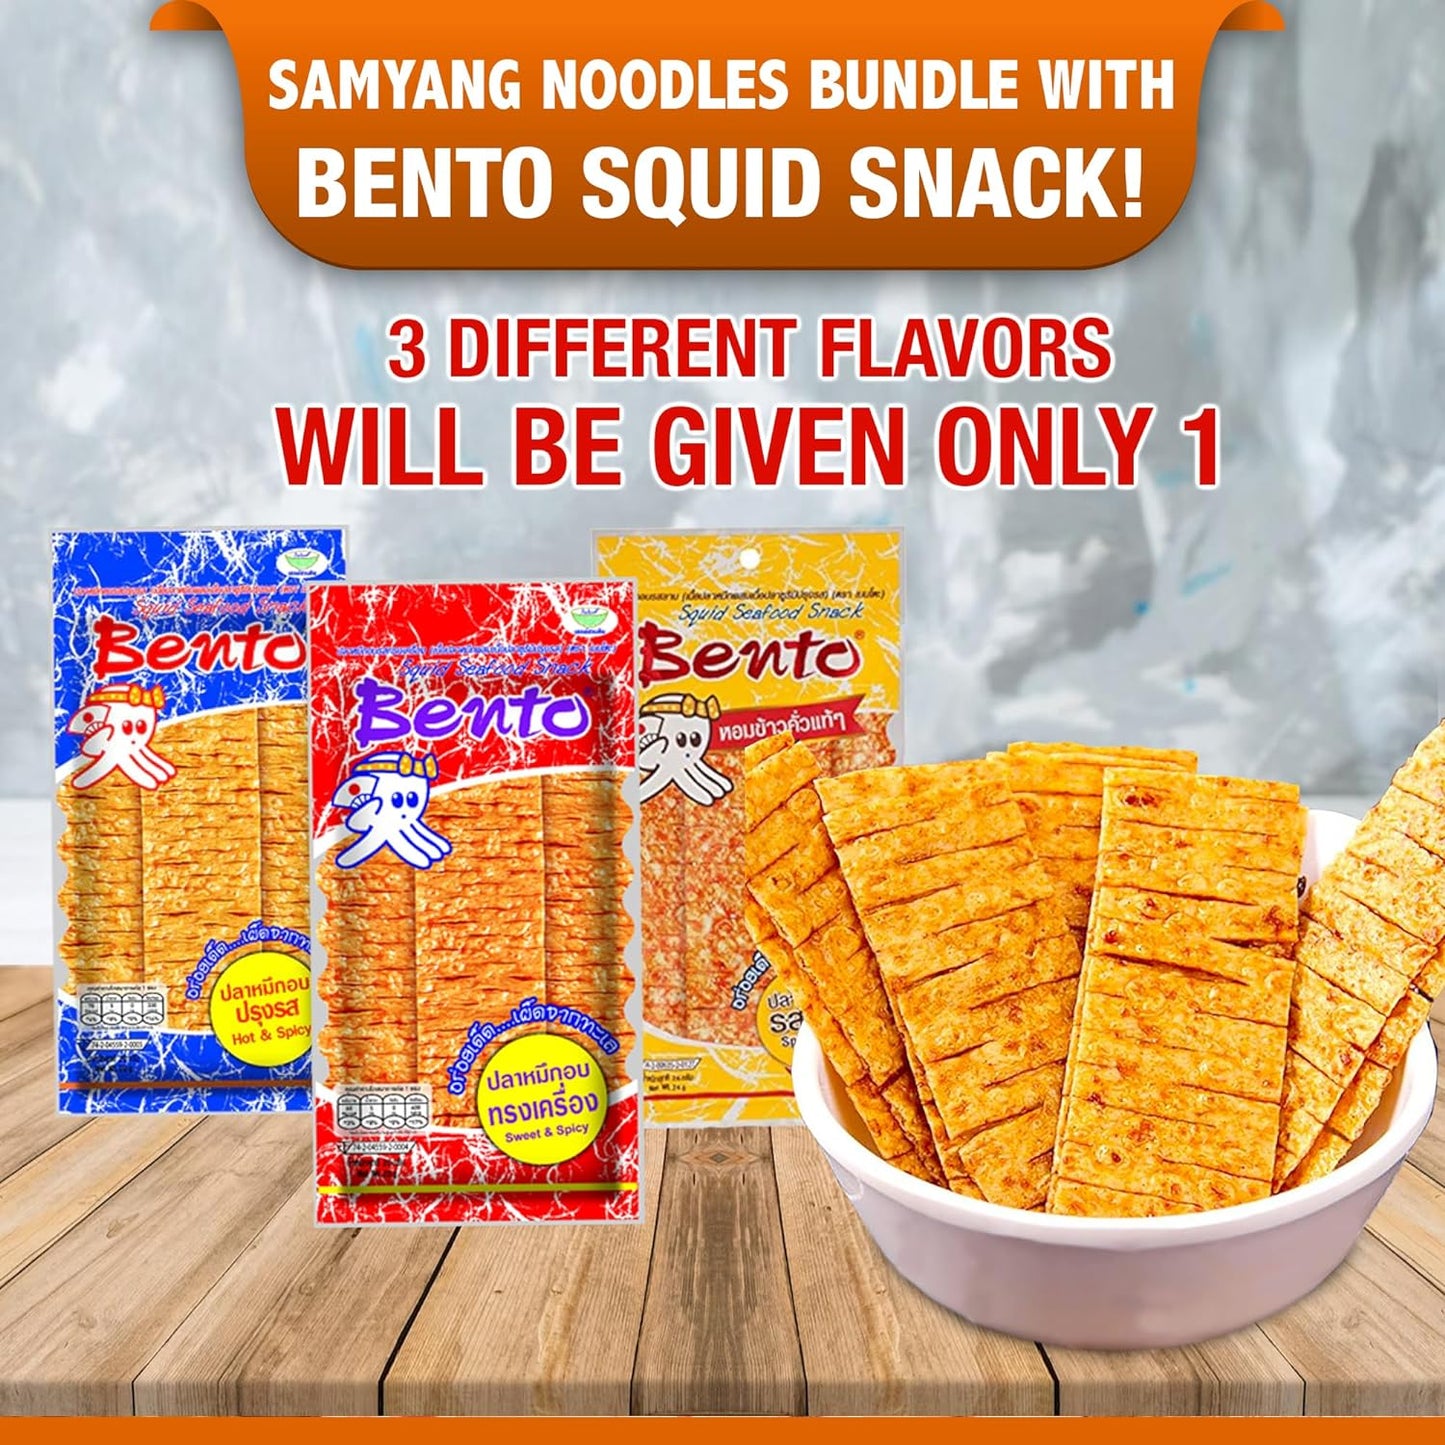 SAMYANG Korean 10 Pack Variety Noodles with Bento Snack! Includes Fortune Cookie & Pair of Chopsticks!